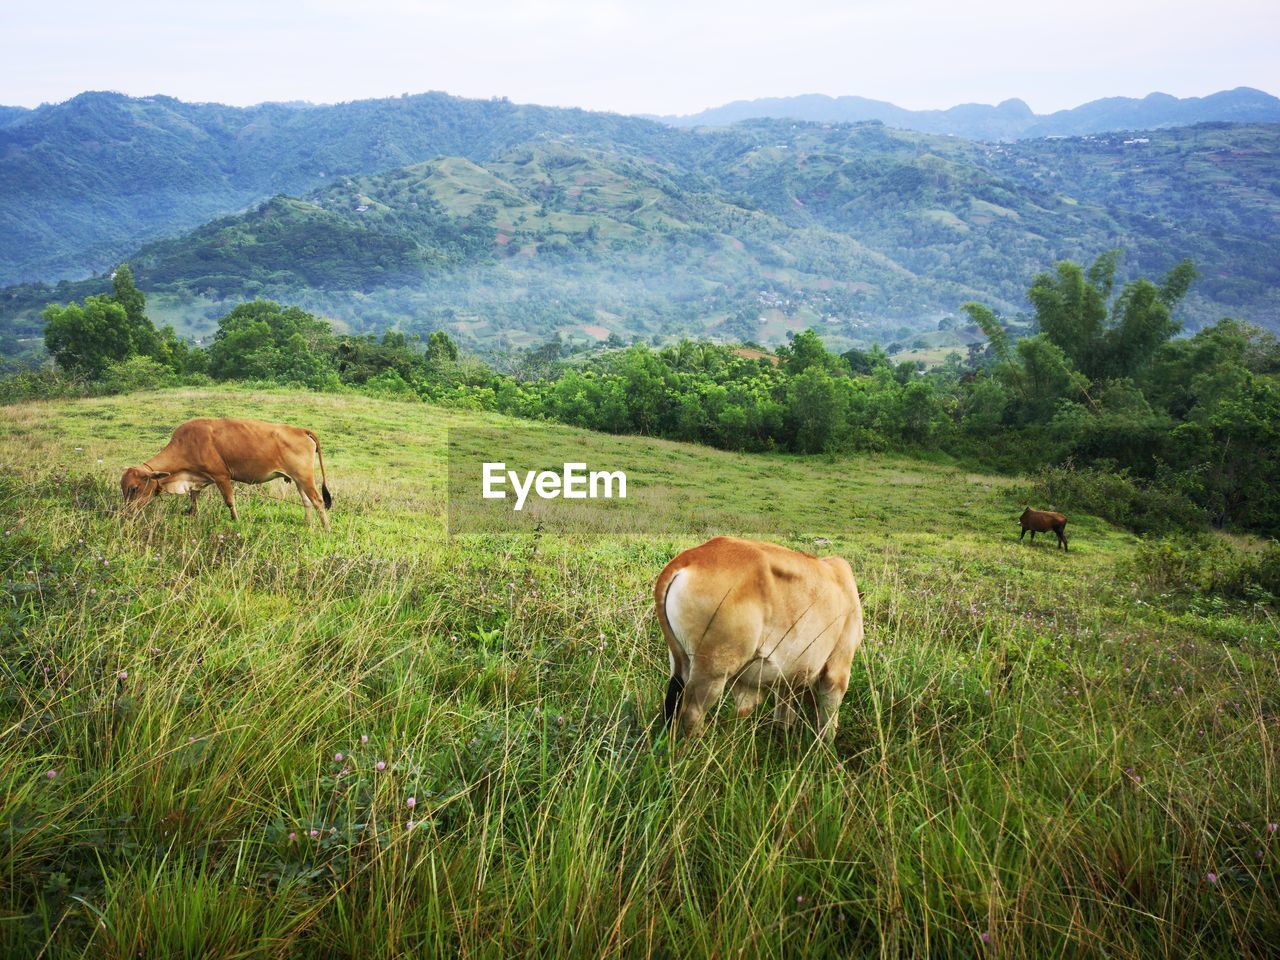 Cows eating grasses